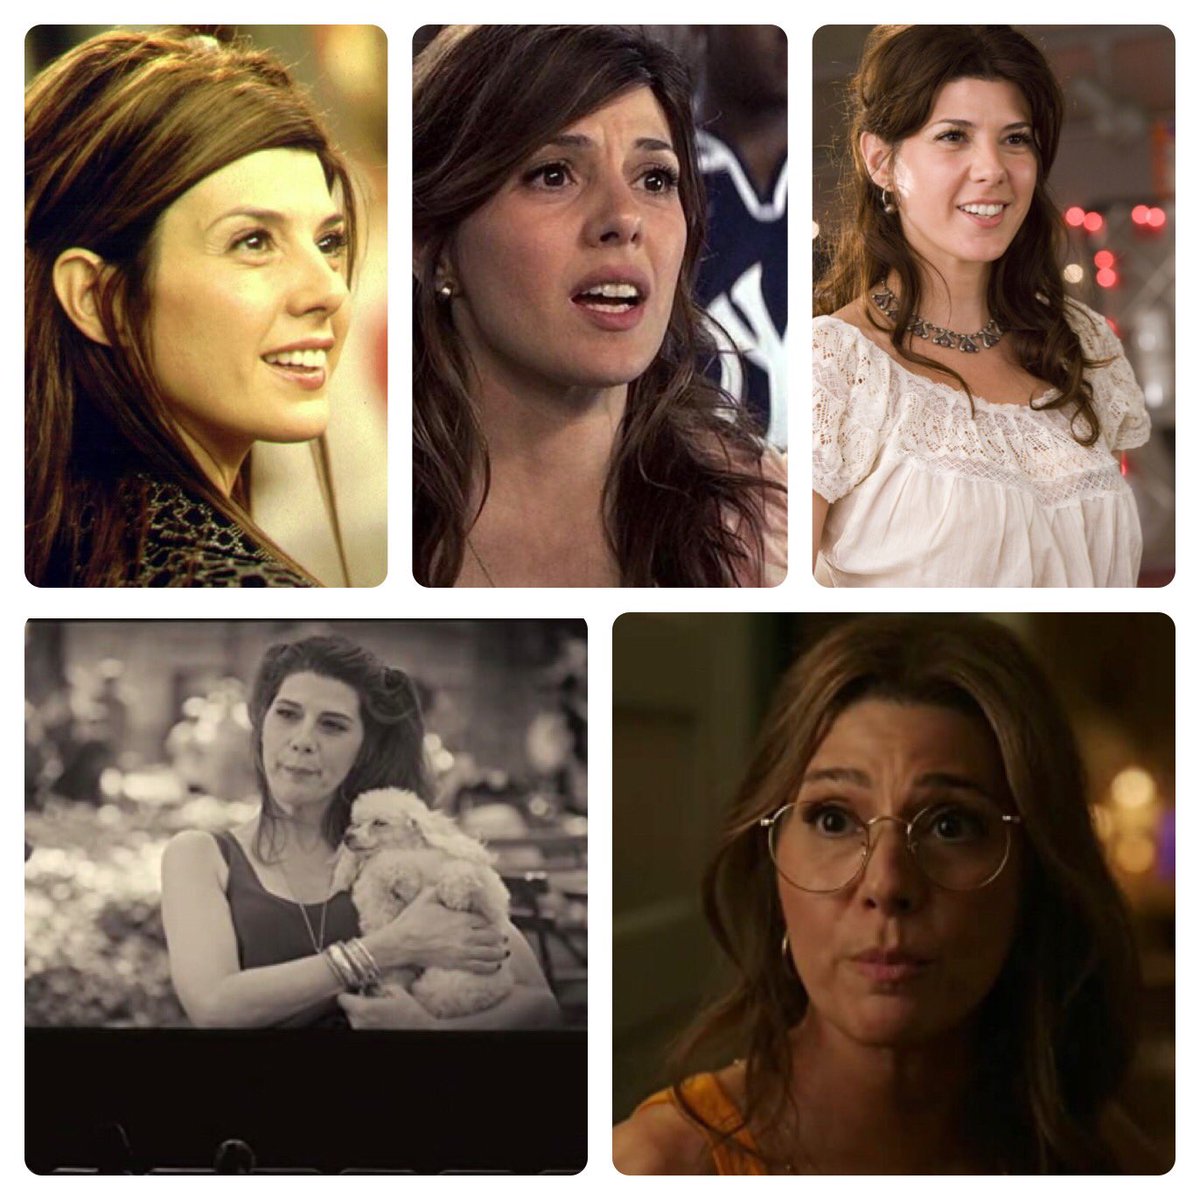 Happy 58th birthday to Marisa Tomei
#happybirthday #marisatomei 
#spidermanhomecoming #spidermanhomecomingmovie #spidermanffh #spidermanfarfromhome #spidermannwh #spidermannowayhome #mayparker #trainwreck #wildhogs #angermanagement   #whatwomenwant #filmactress #movieactress